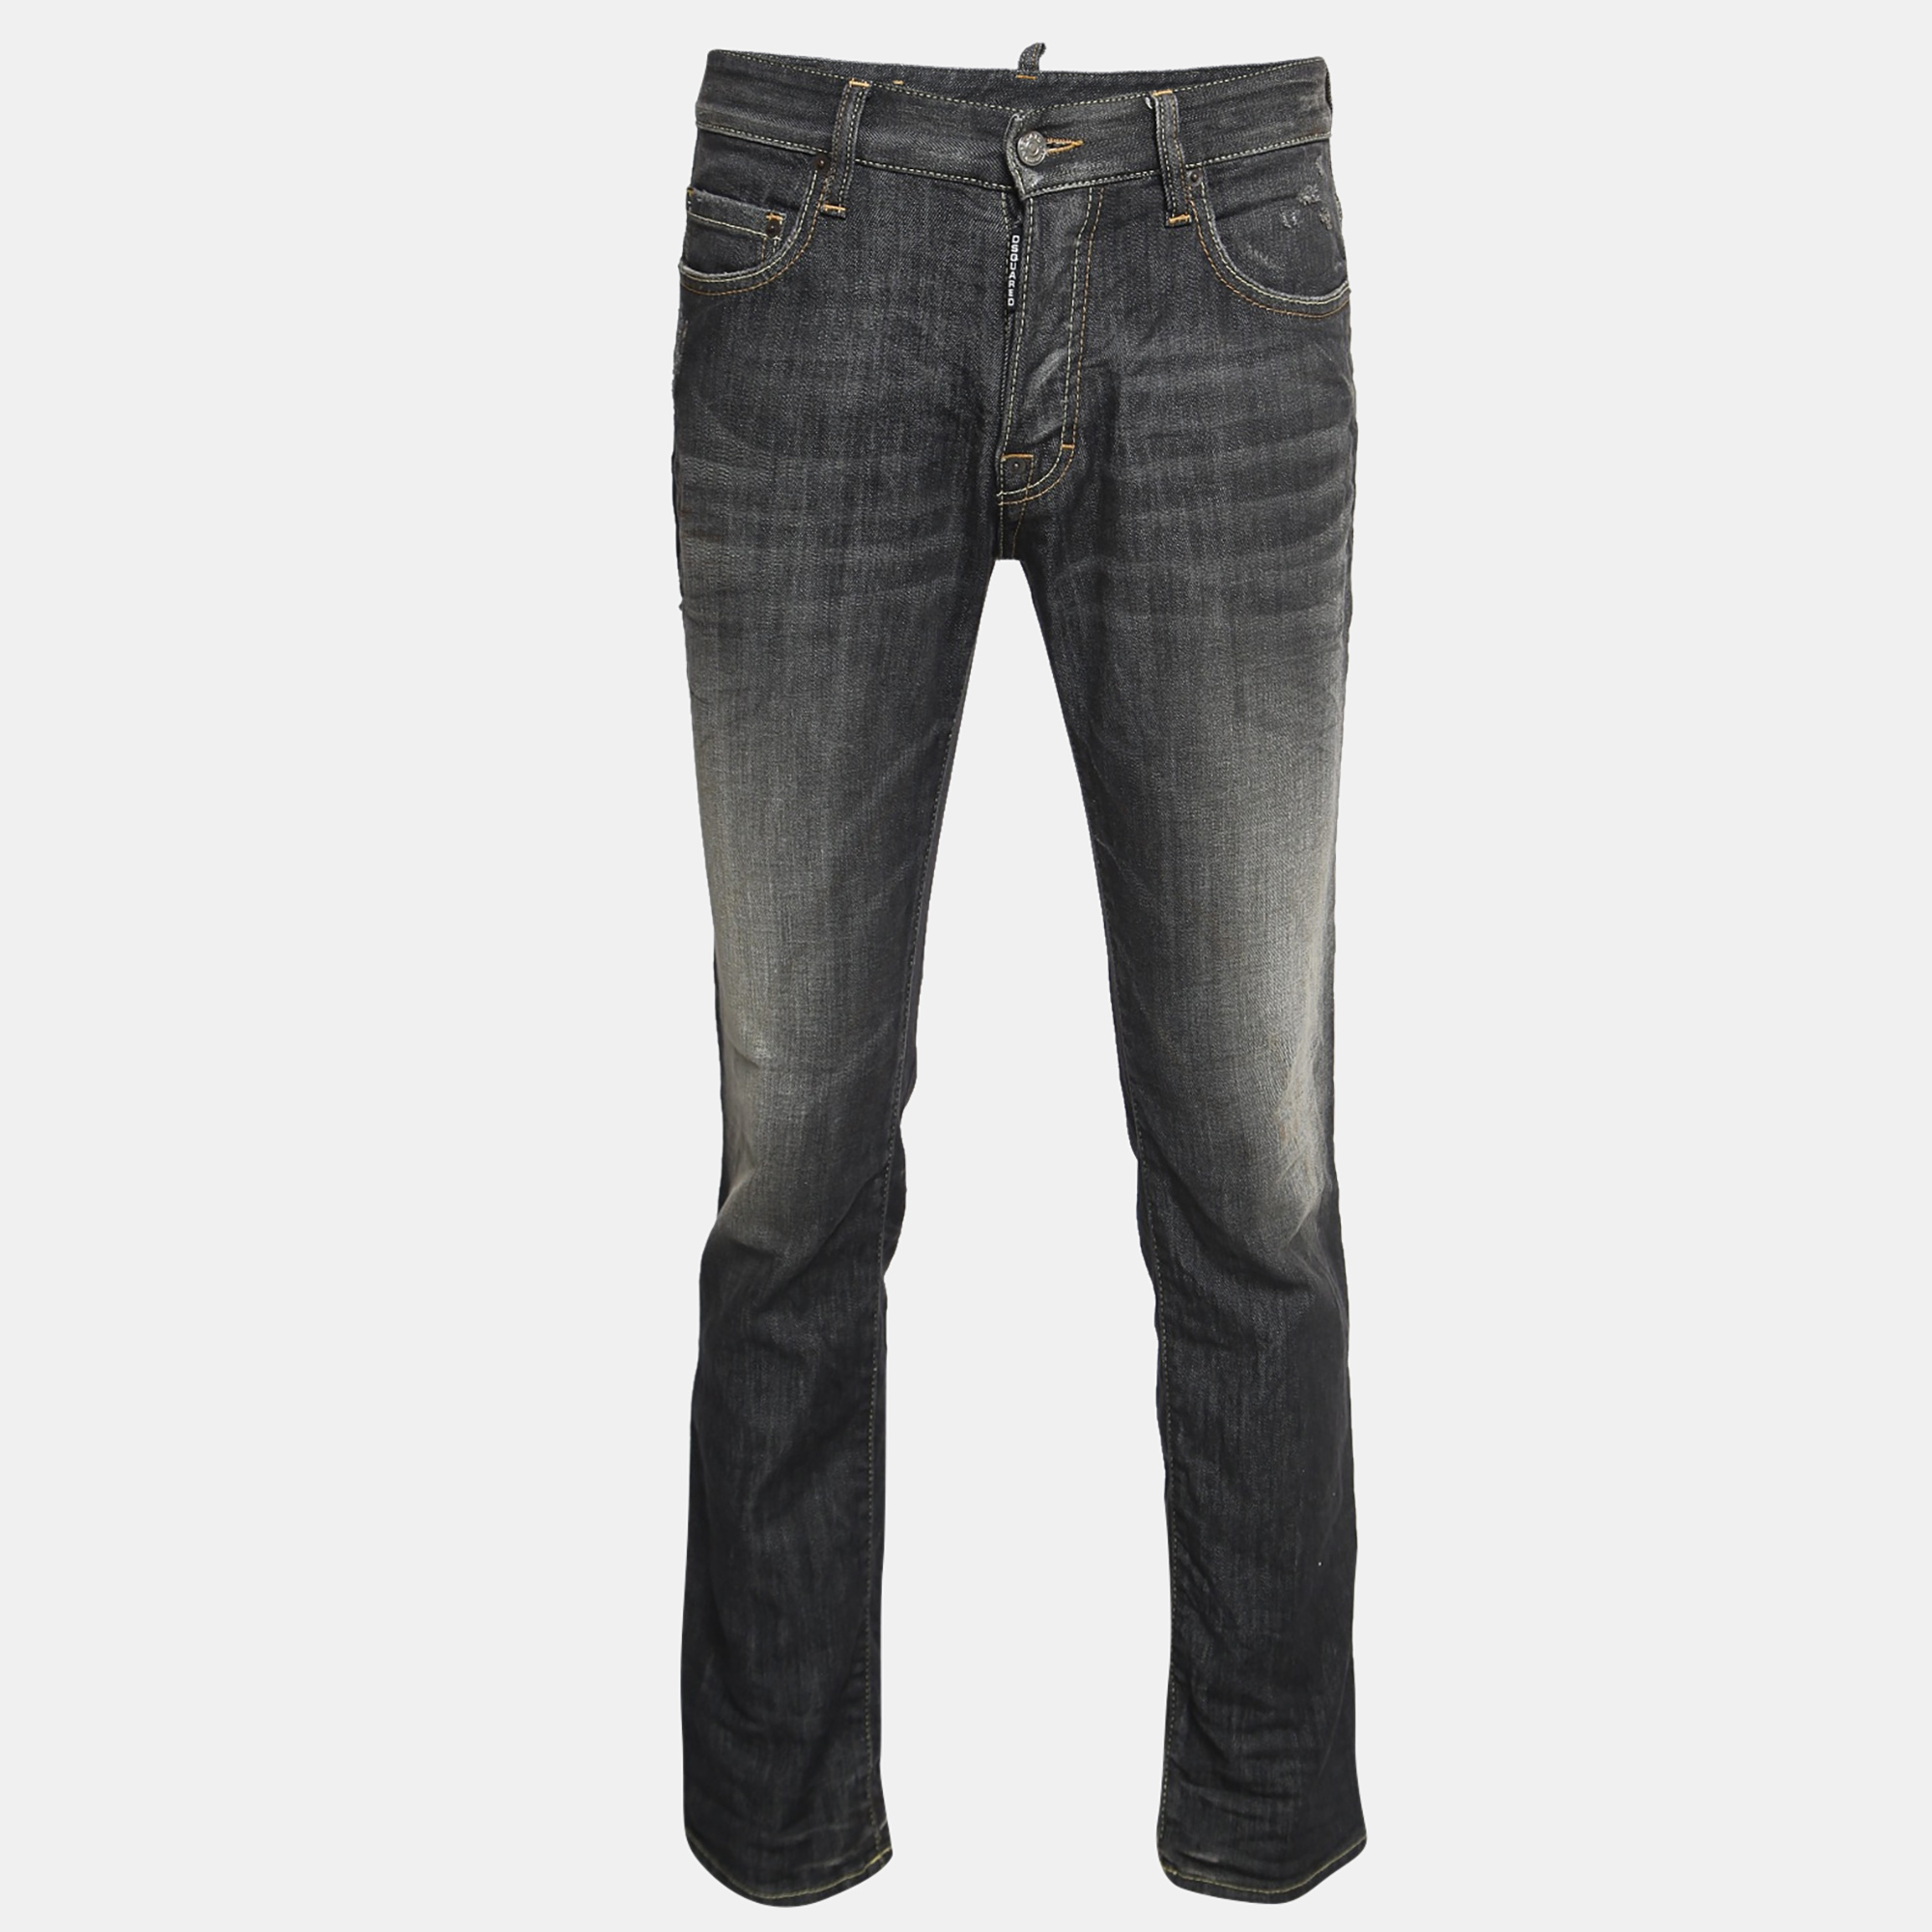 

Dsquared2 Charcoal Grey Washed Denim Jeans  Waist 32